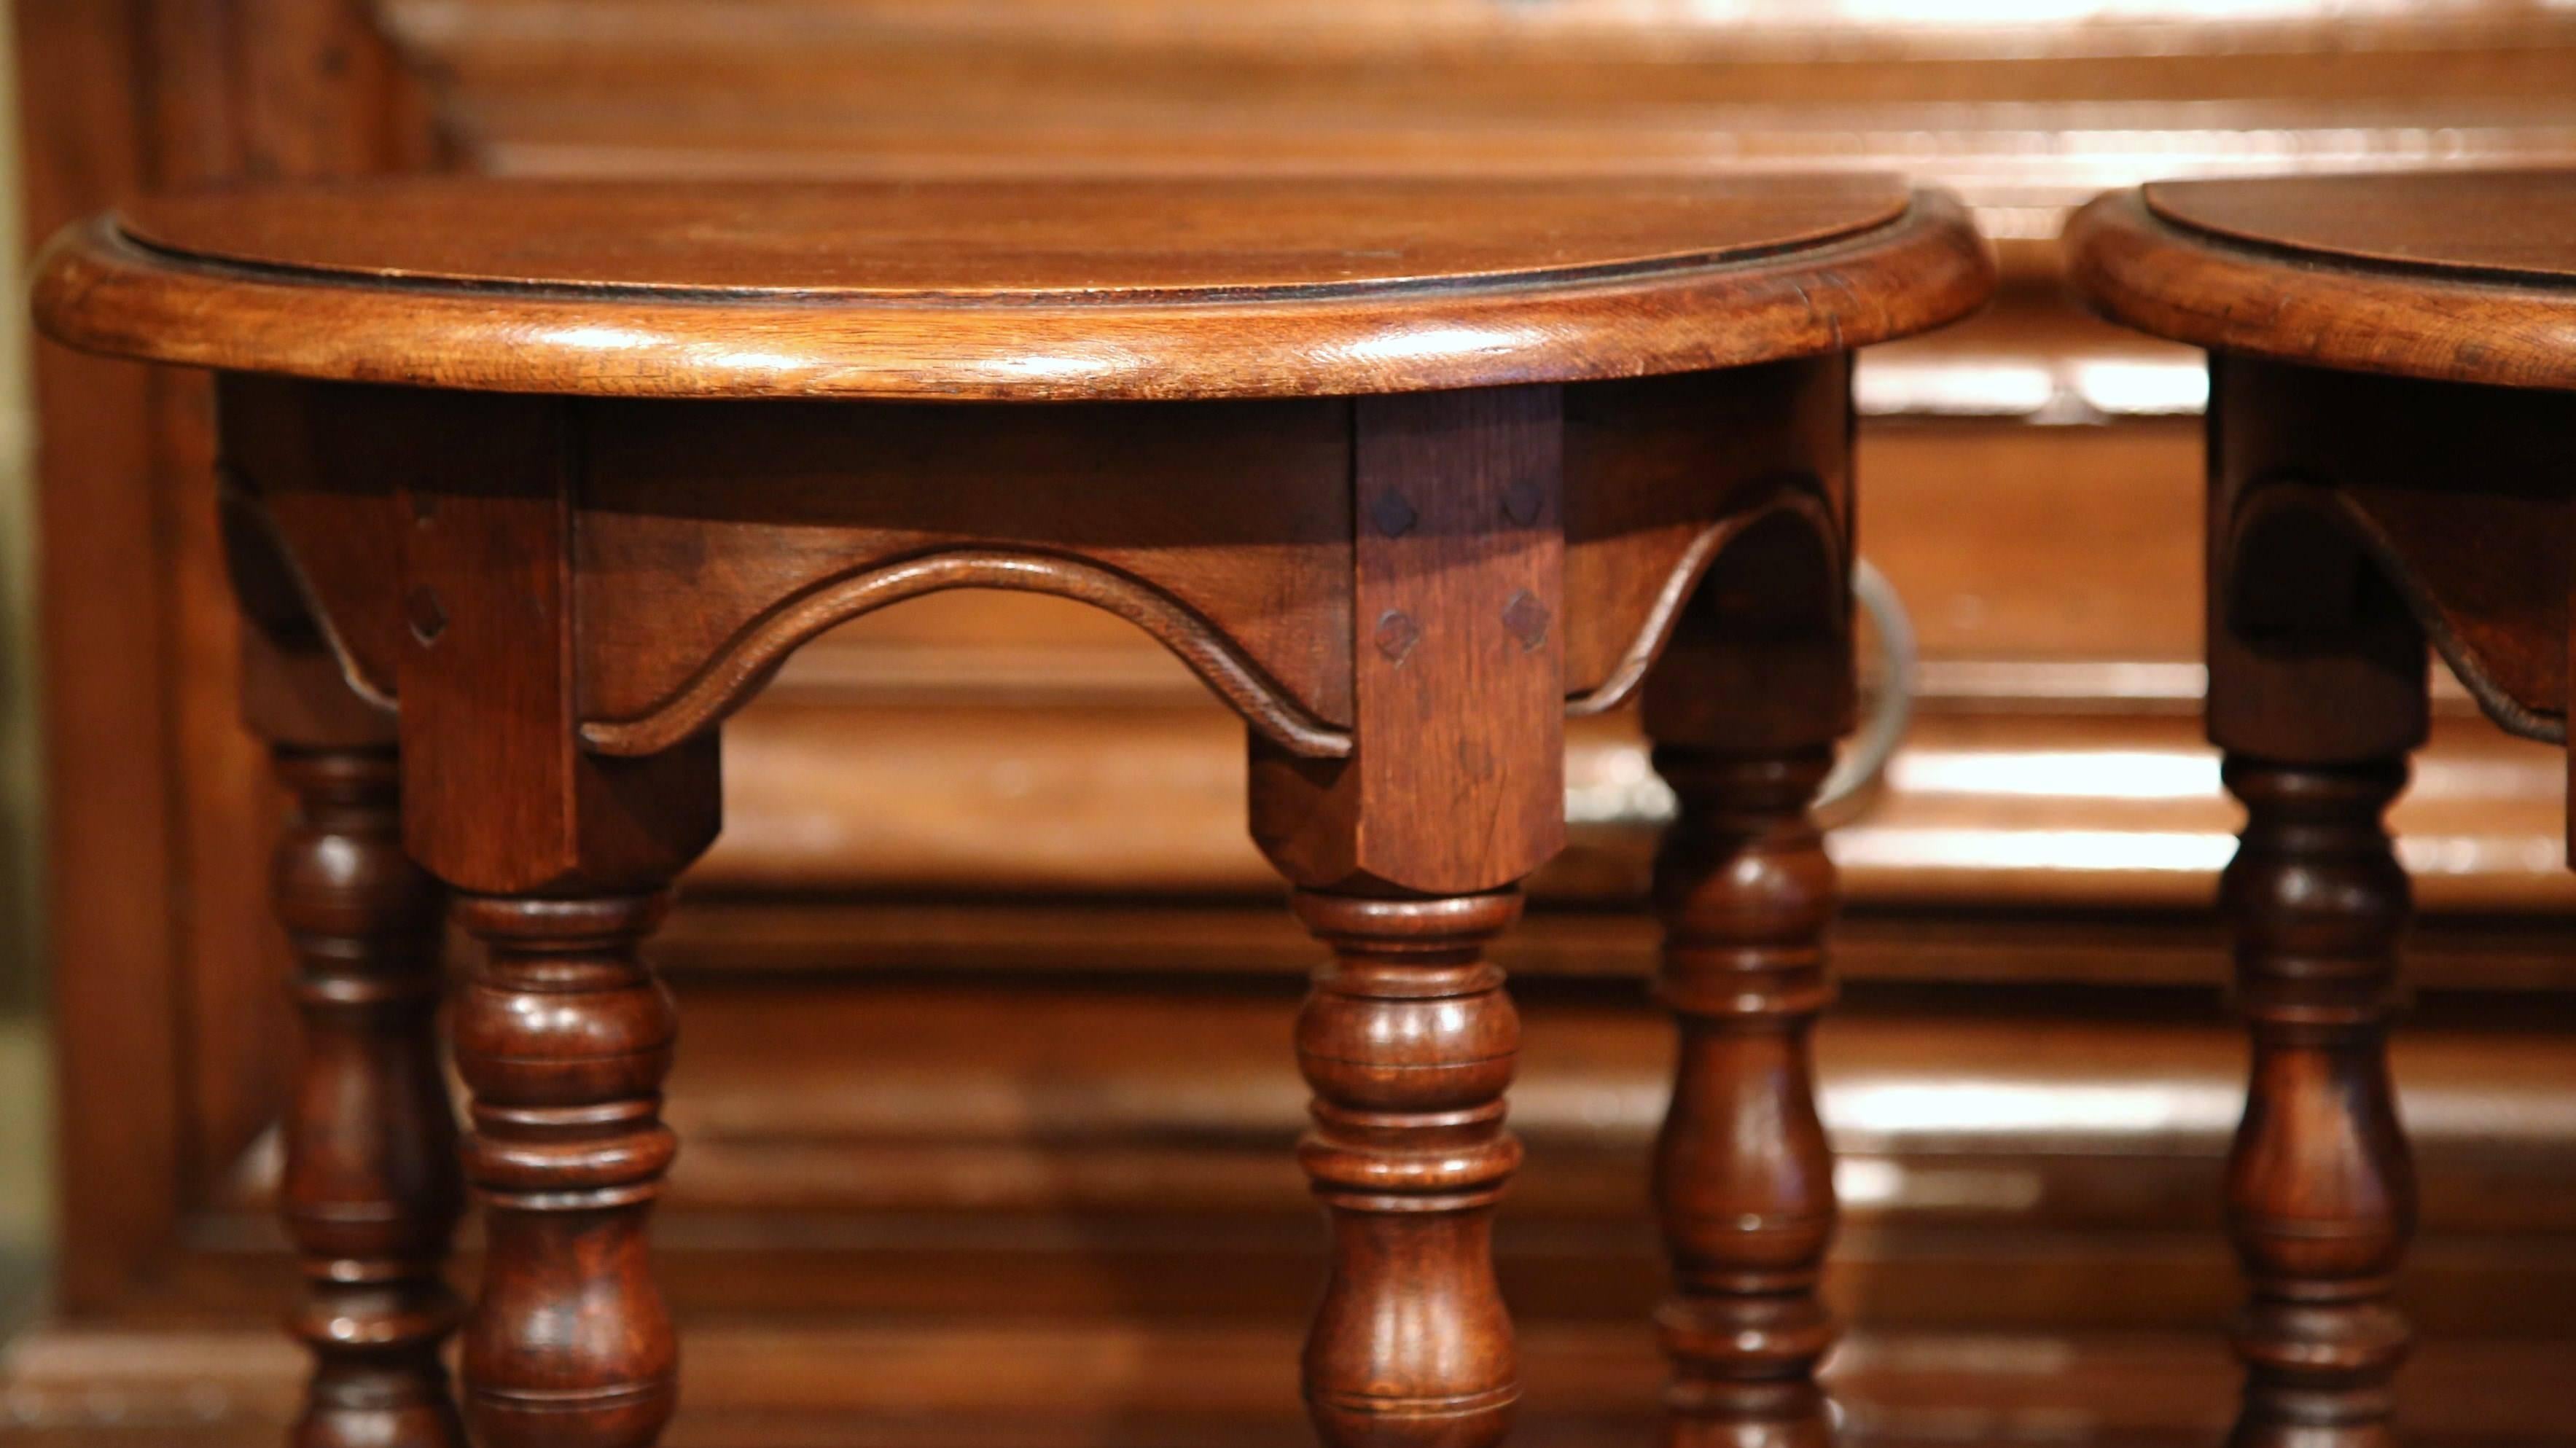 Louis XIII Pair of Mid-20th Century Carved Walnut Demilune Side Tables with Turned Legs